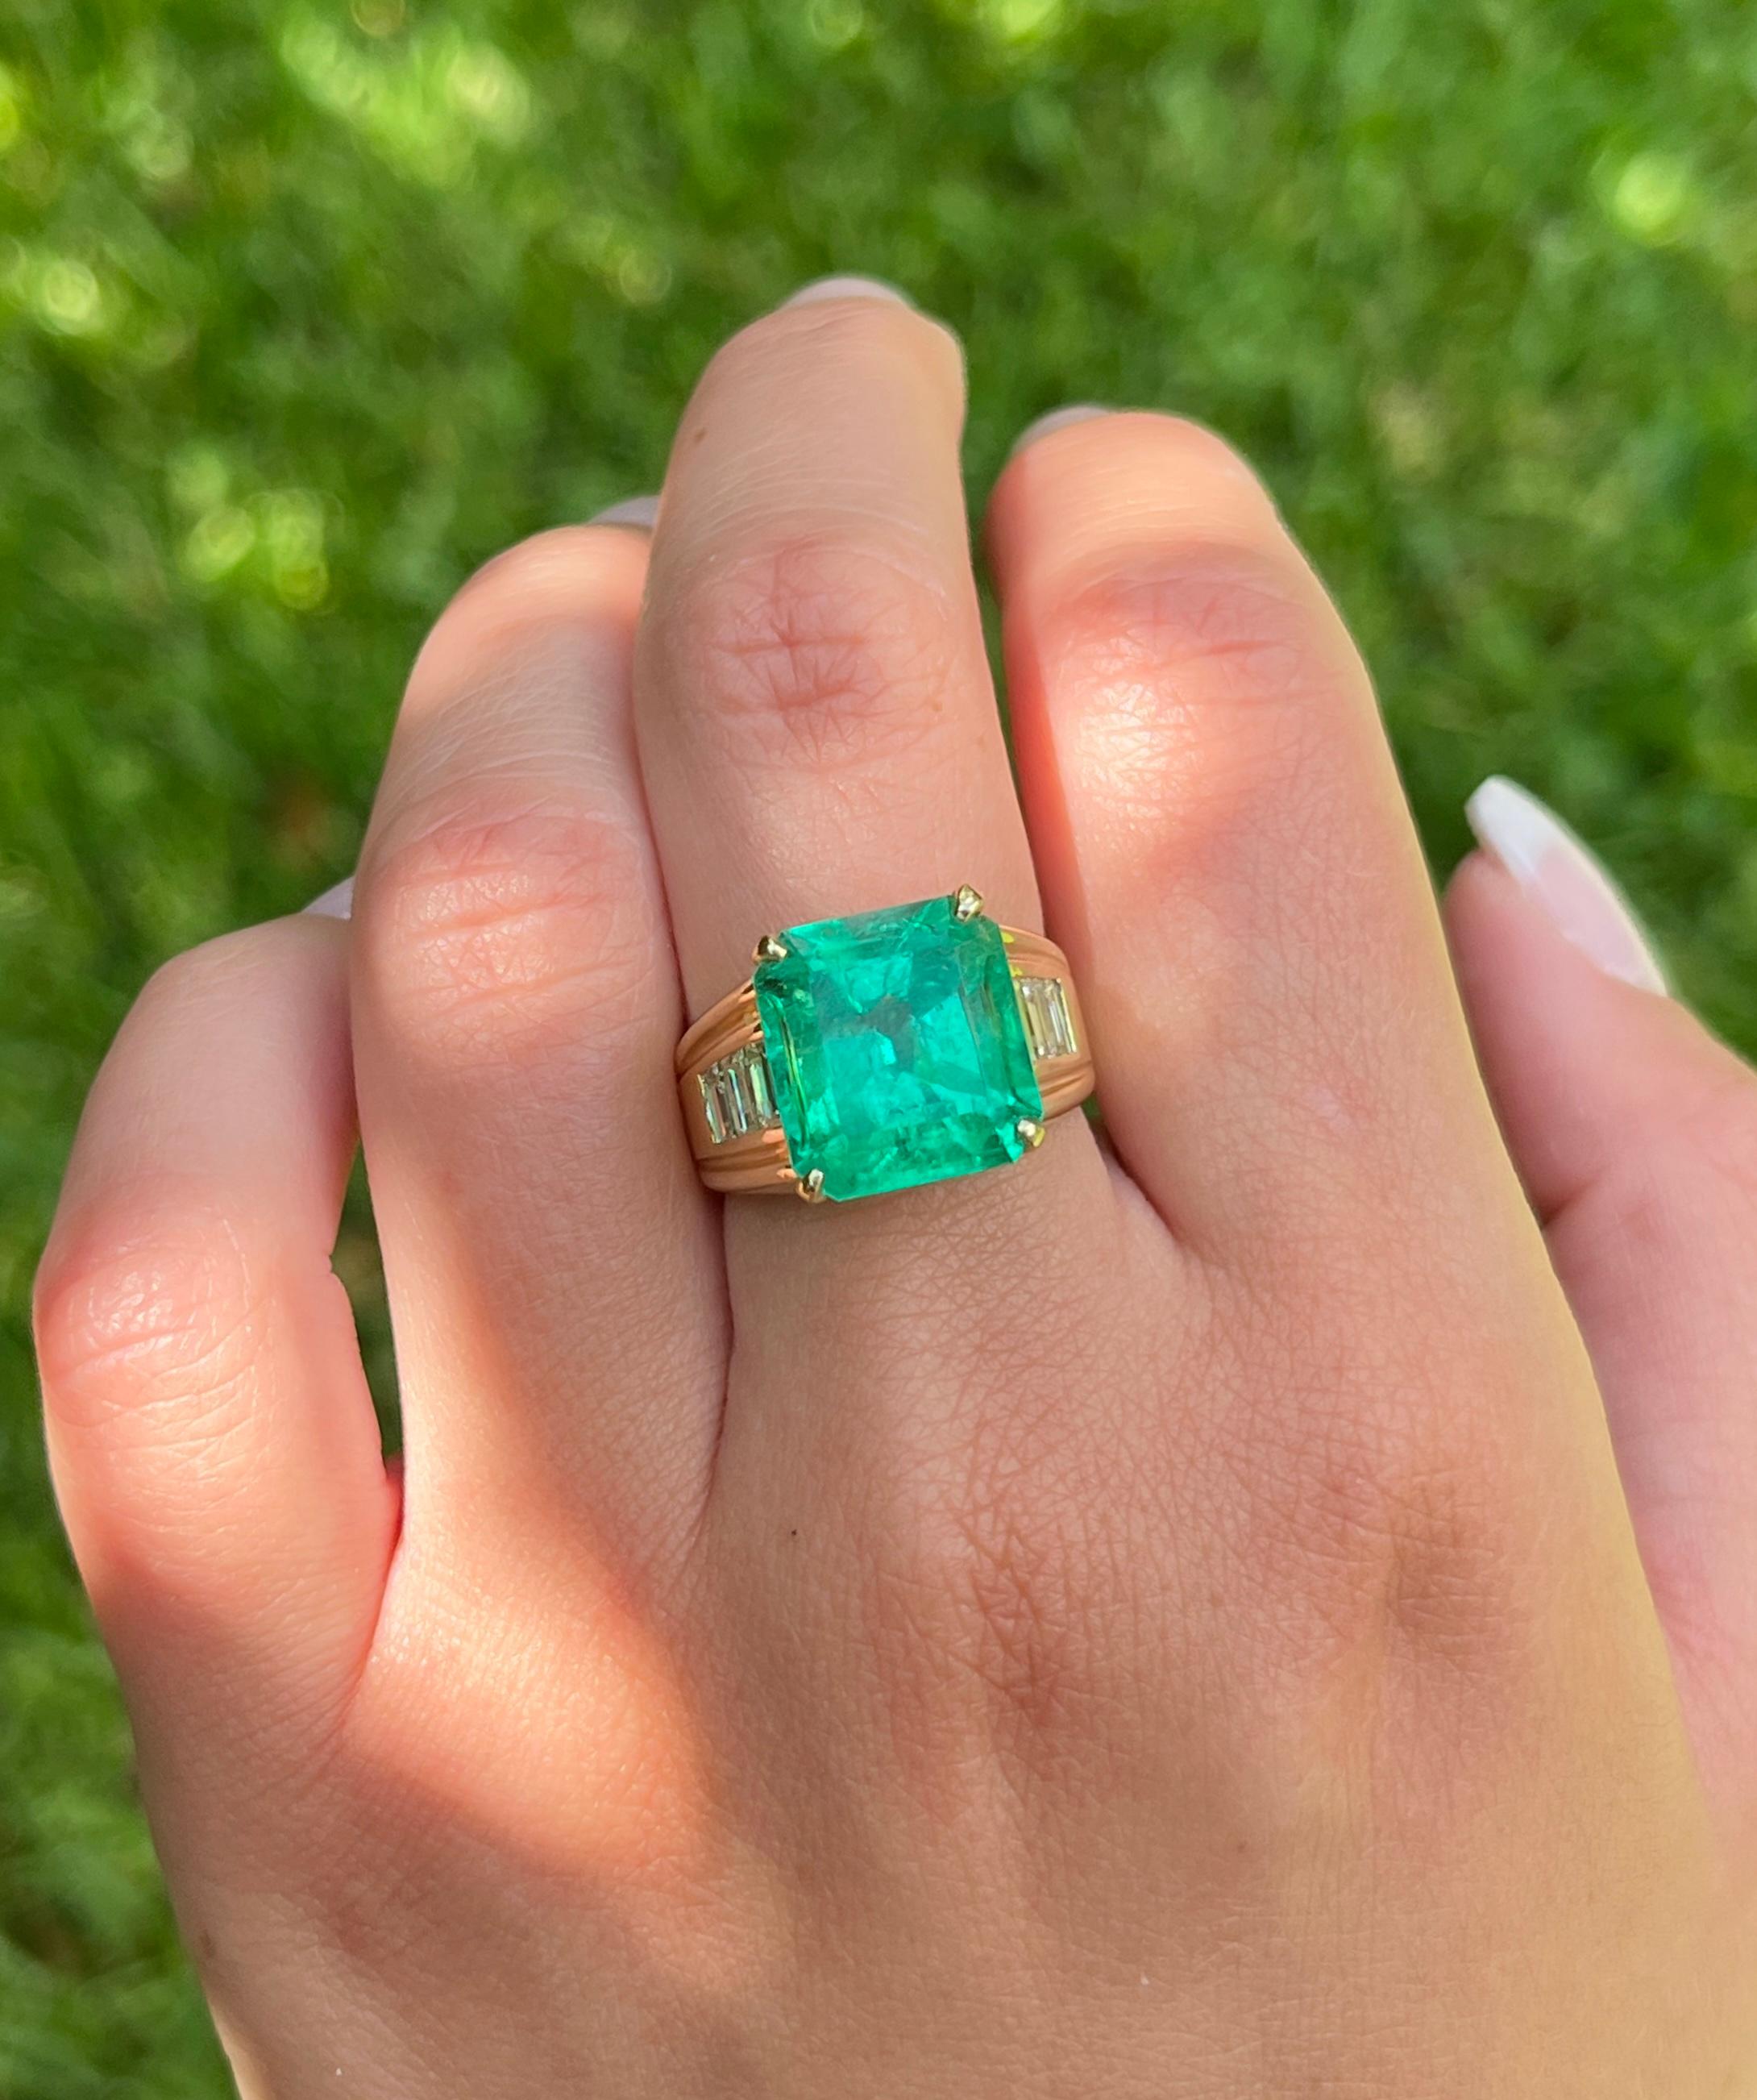 GIA certified 8.64 carat natural Colombian emerald unisex ring, complimented by 6 baguette cut diamond side stones. The diamonds are channel set with a 4-prong mounting on the emerald. This ring is ideal as a men's pinky ring or a woman's